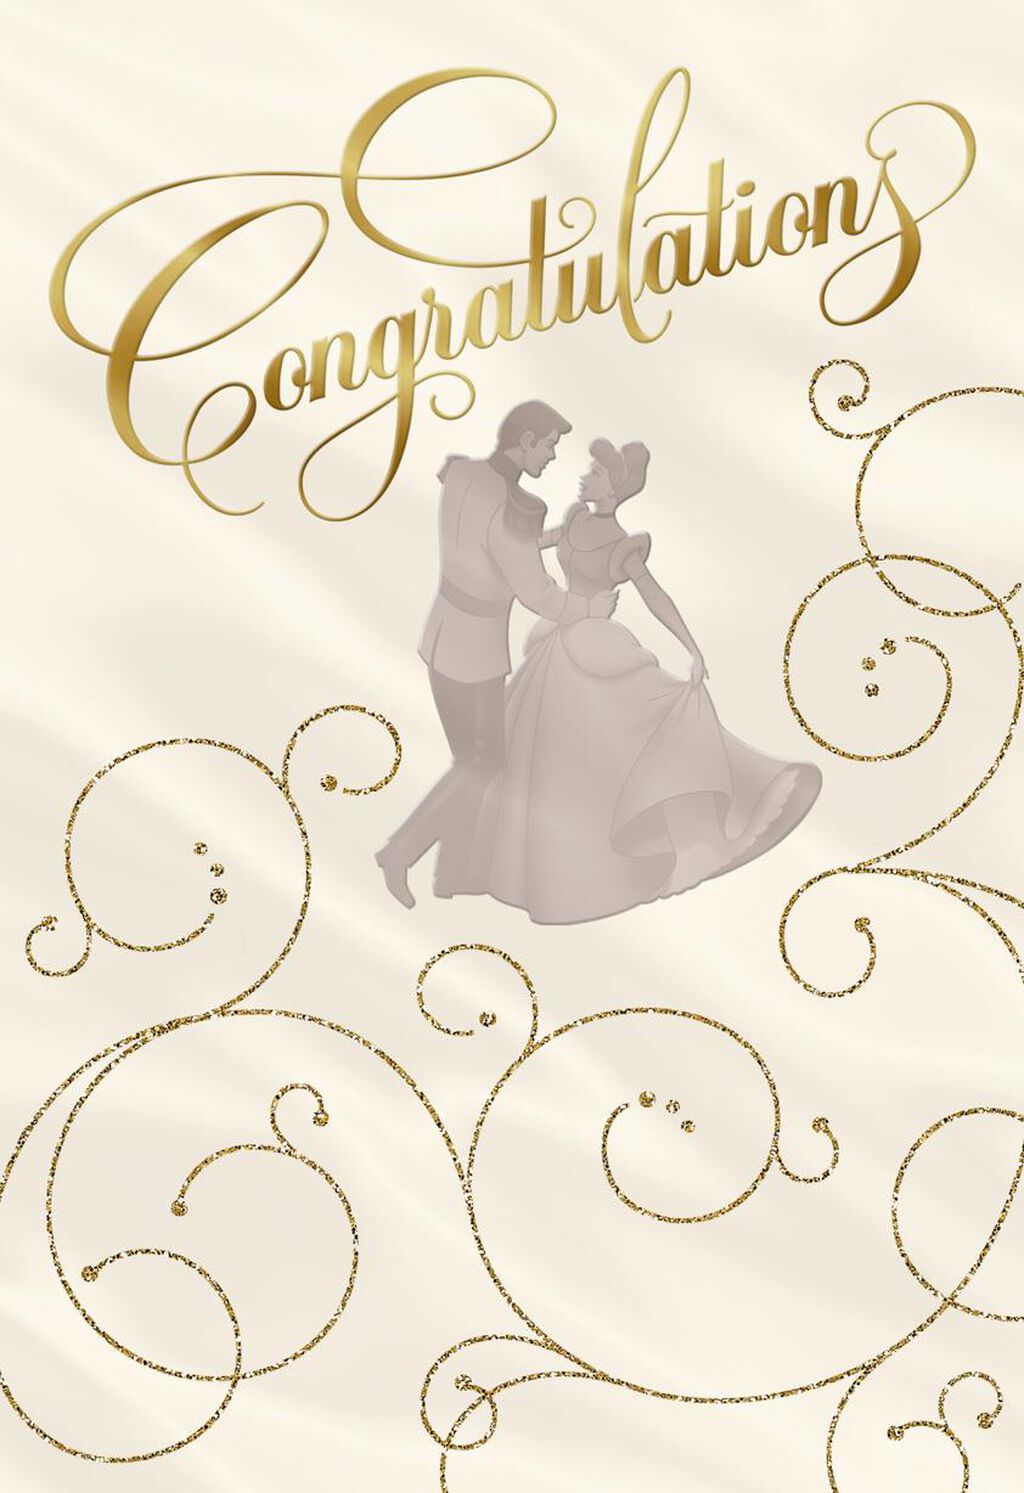 Disney Cinderella Happily Ever After Wedding Card Greeting Cards